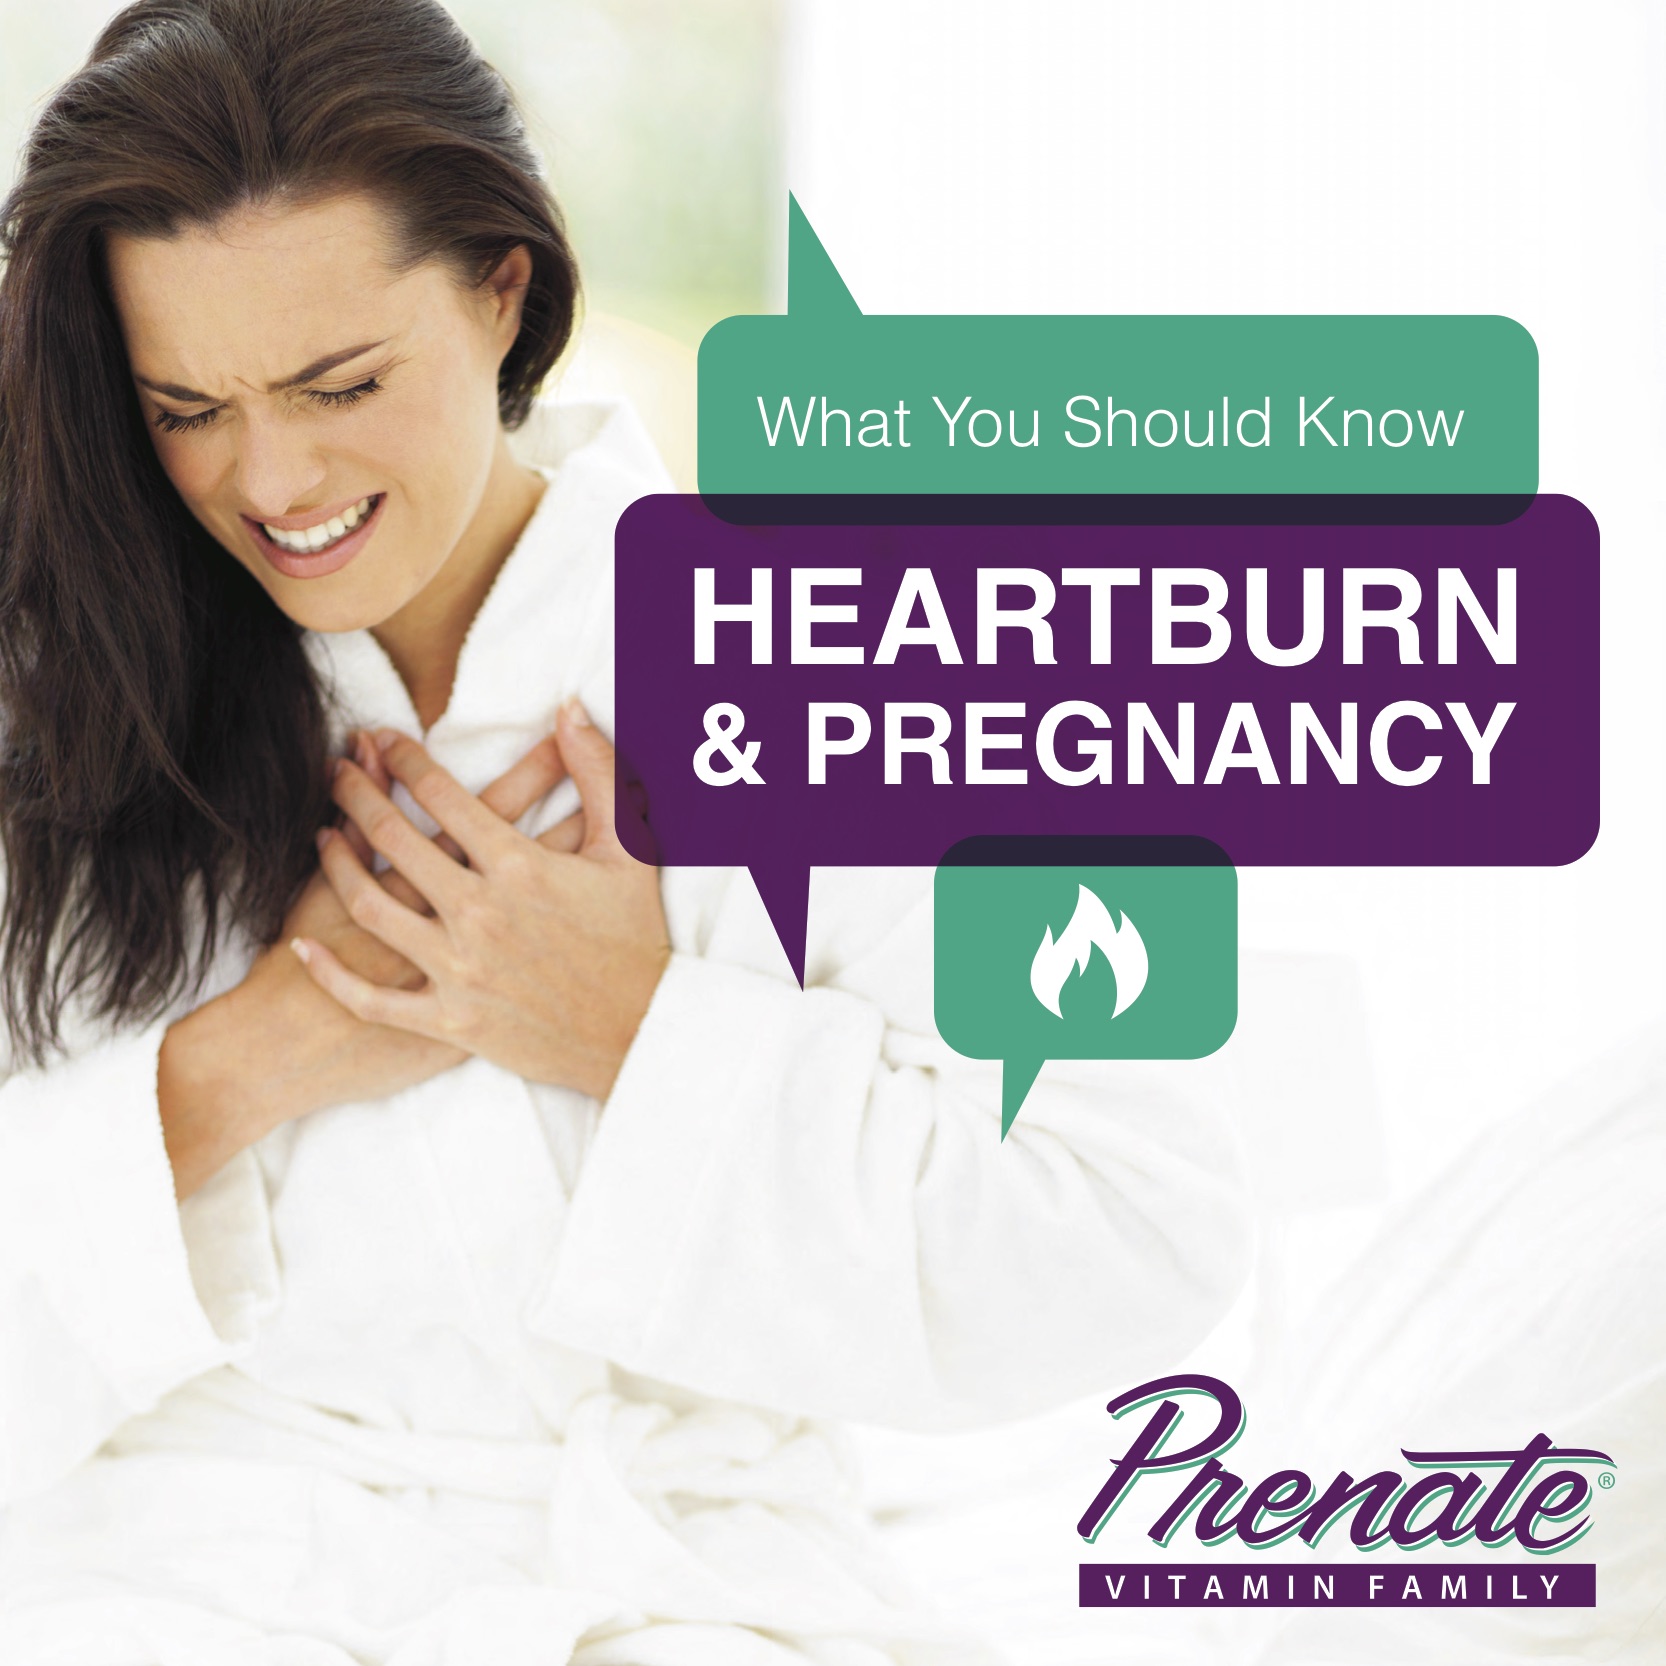 heartburn and pregnancy: what you should know - prenate vitamin family